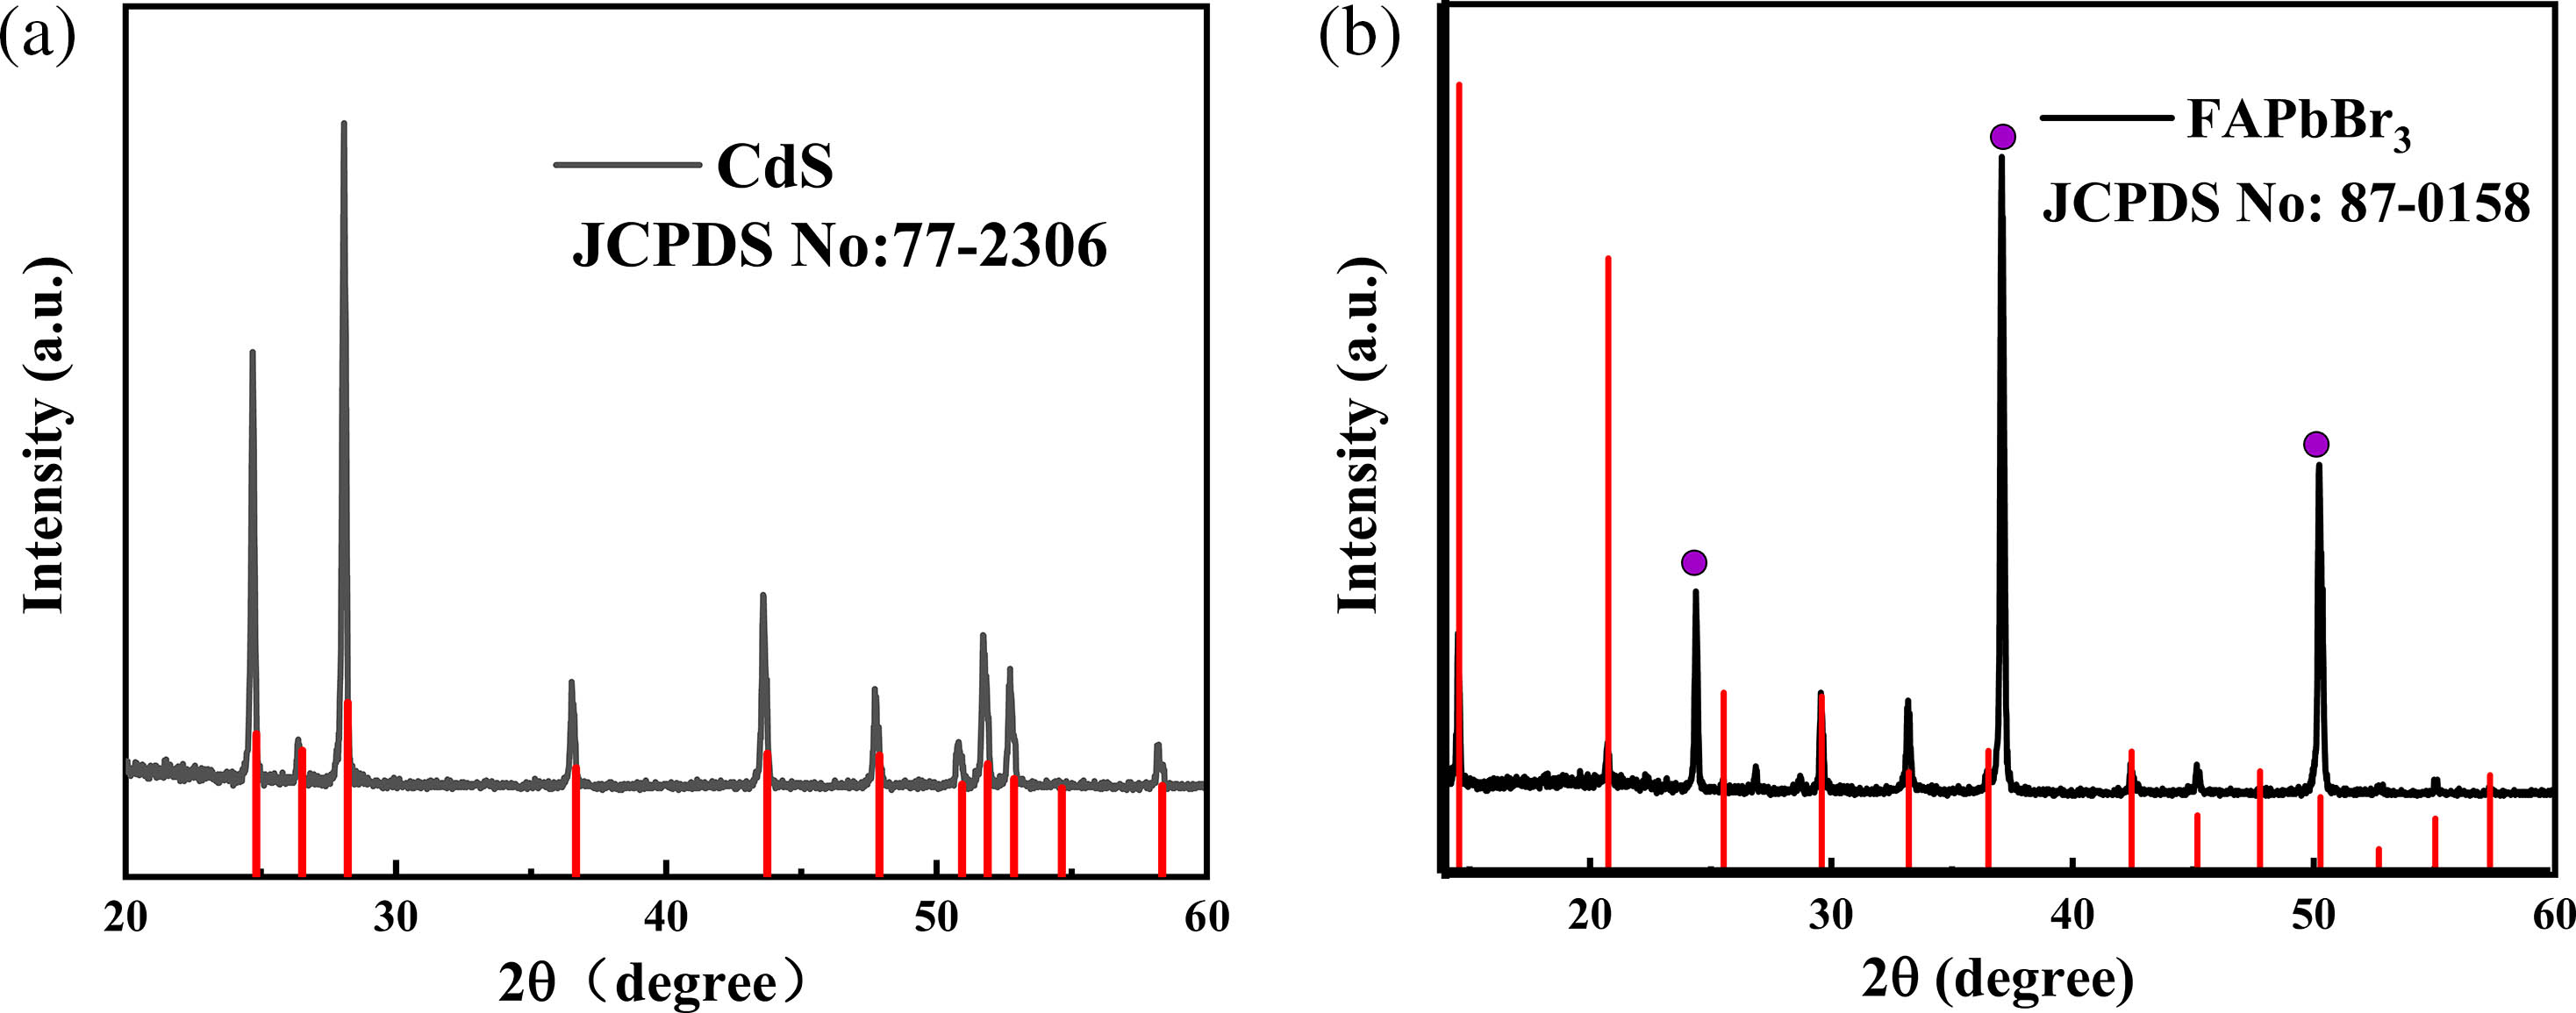 XRD patterns of the samples: (a) CdS NBs; (b) FAPbBr3 NSs.